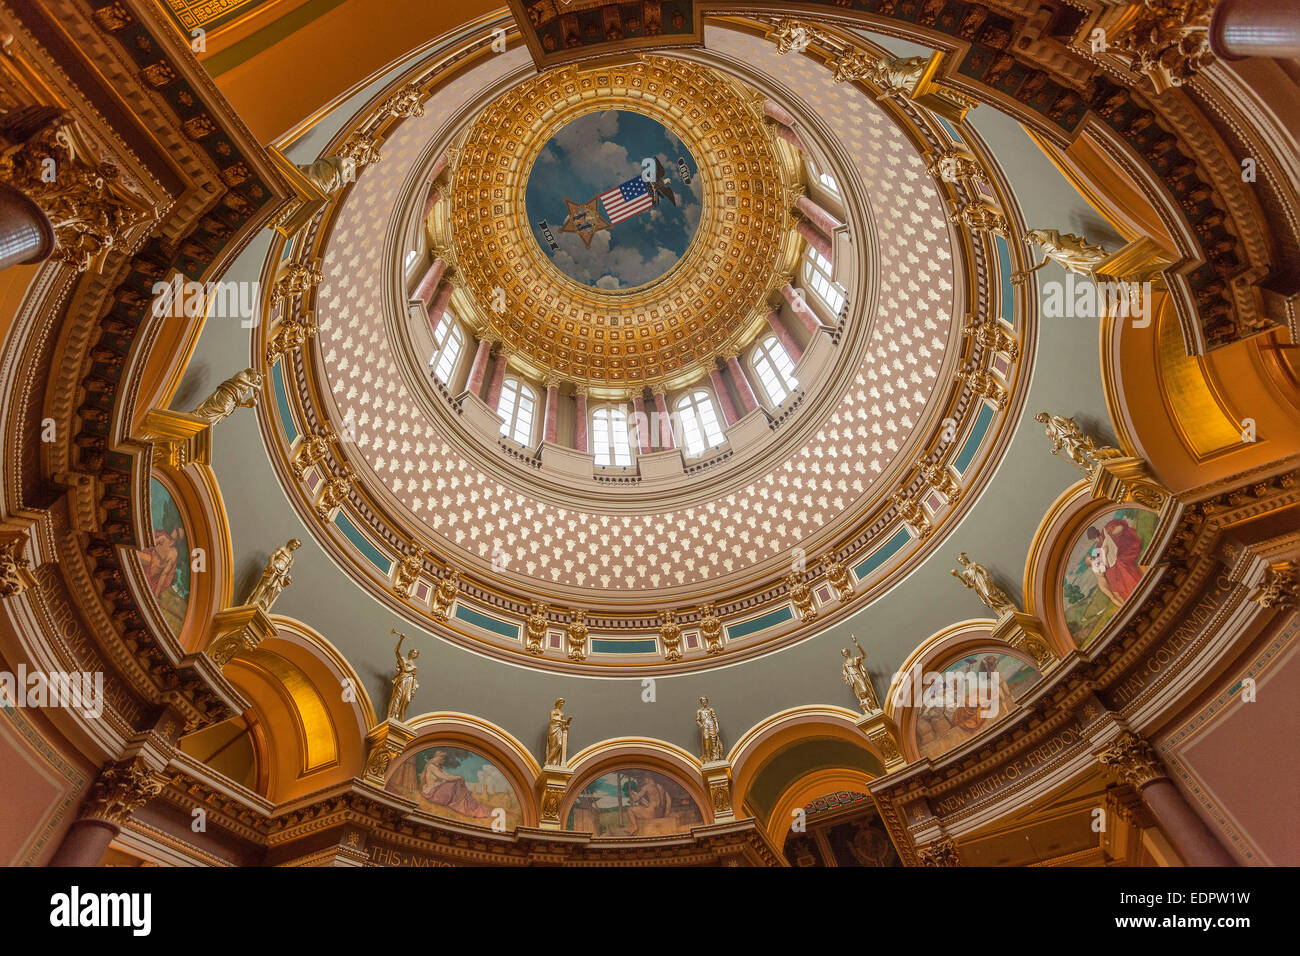 Iowa State Capitol dome viewed from the inside. Des Moines, Iowa. Stock Photo